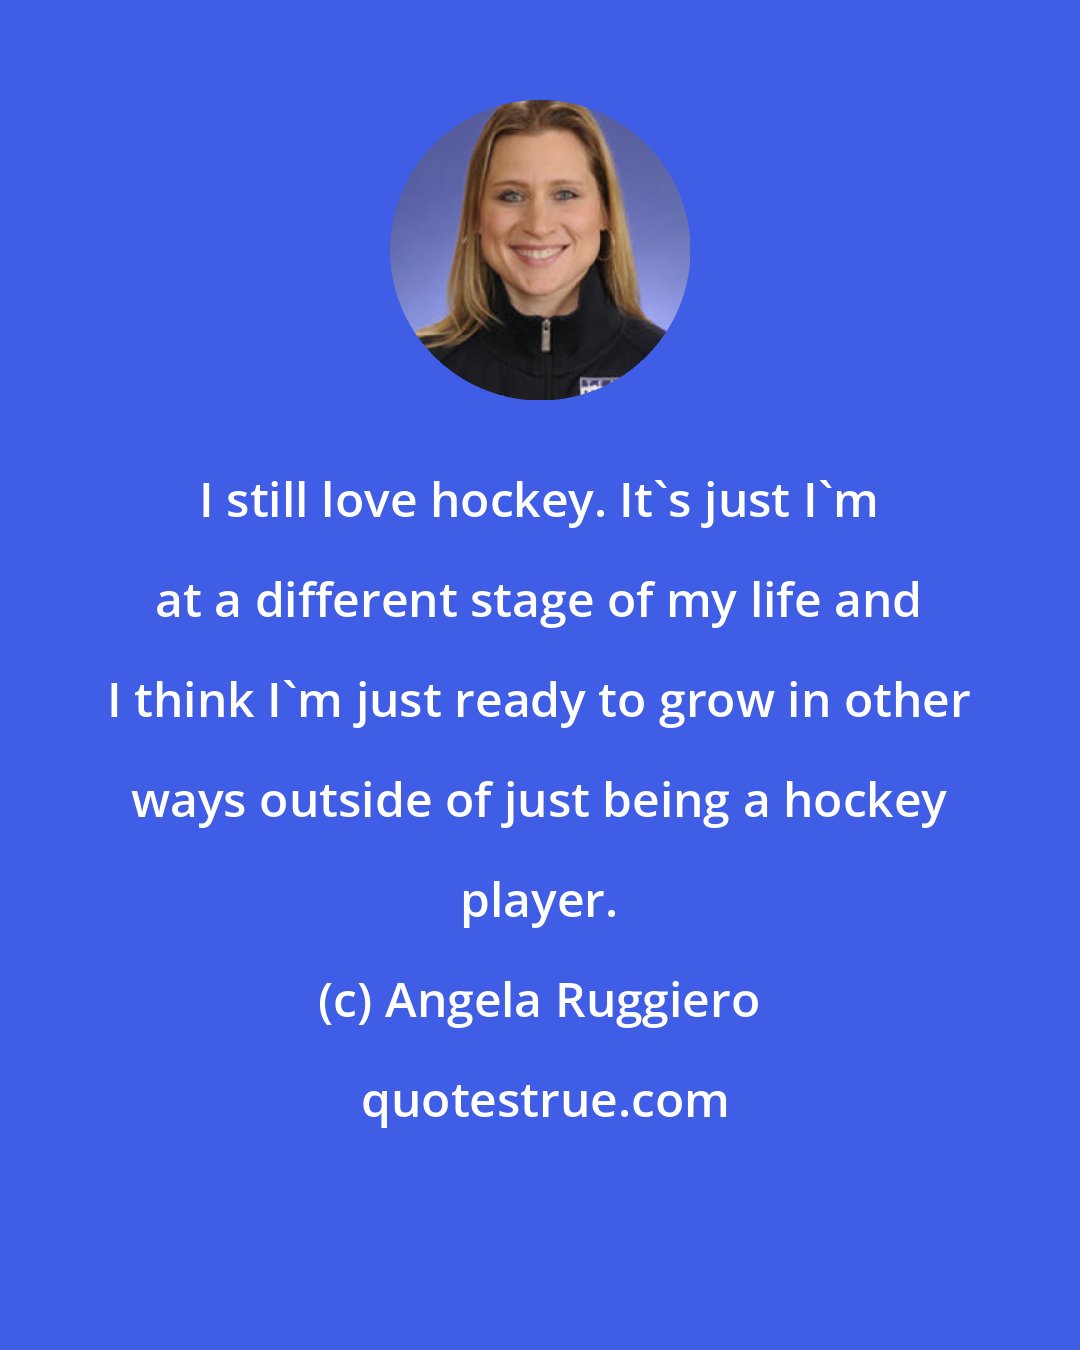 Angela Ruggiero: I still love hockey. It's just I'm at a different stage of my life and I think I'm just ready to grow in other ways outside of just being a hockey player.